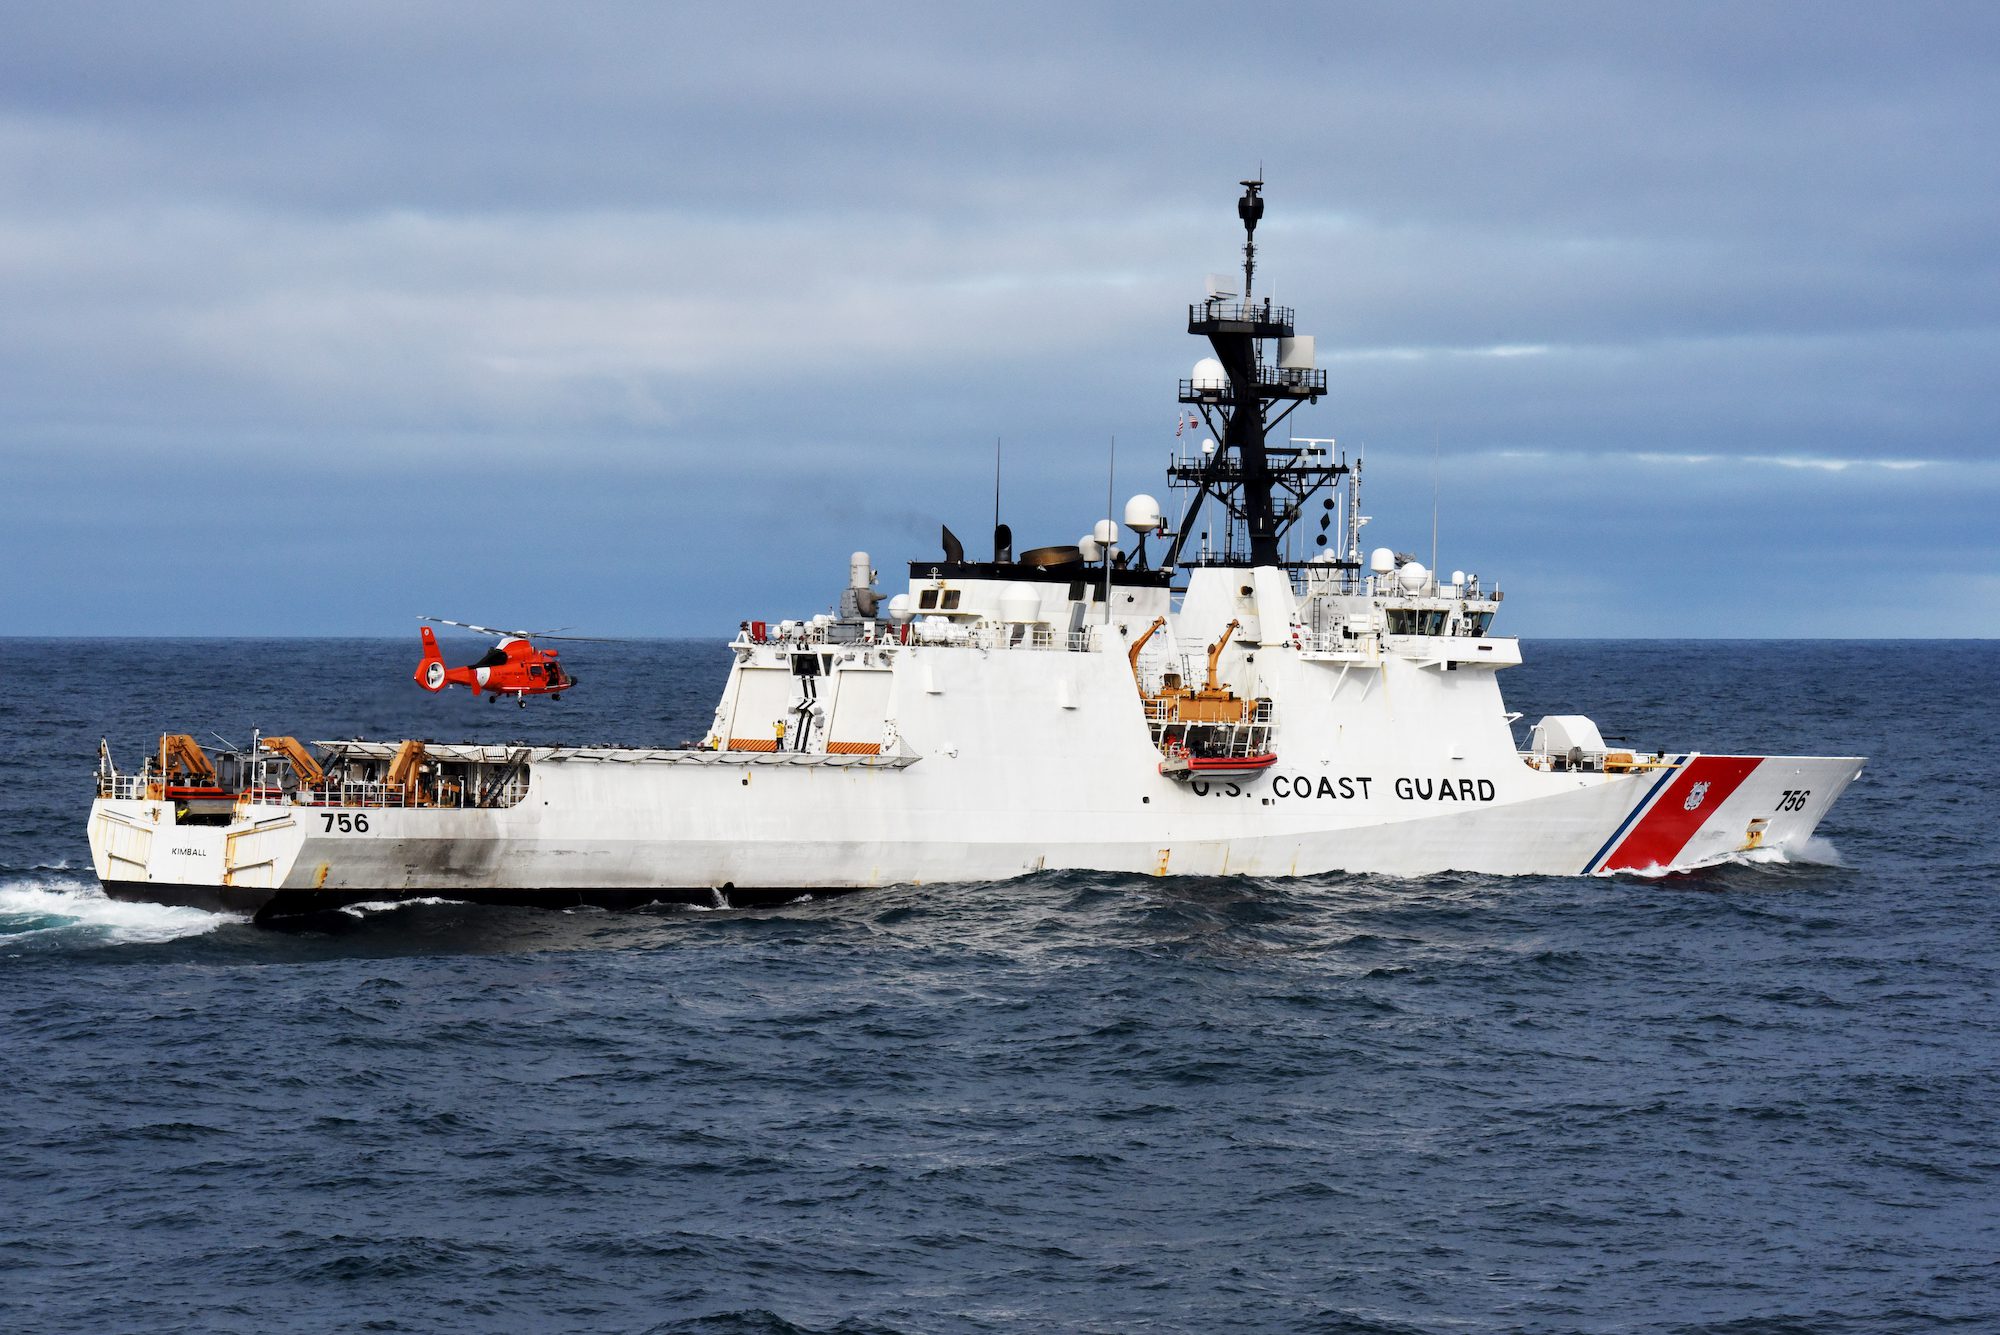 USCGCC Kimball (WMSL 756) conducts flight operations while underway in the North Pacific Ocean Sept. 26, 2022. U.S. Coast Guard Photo